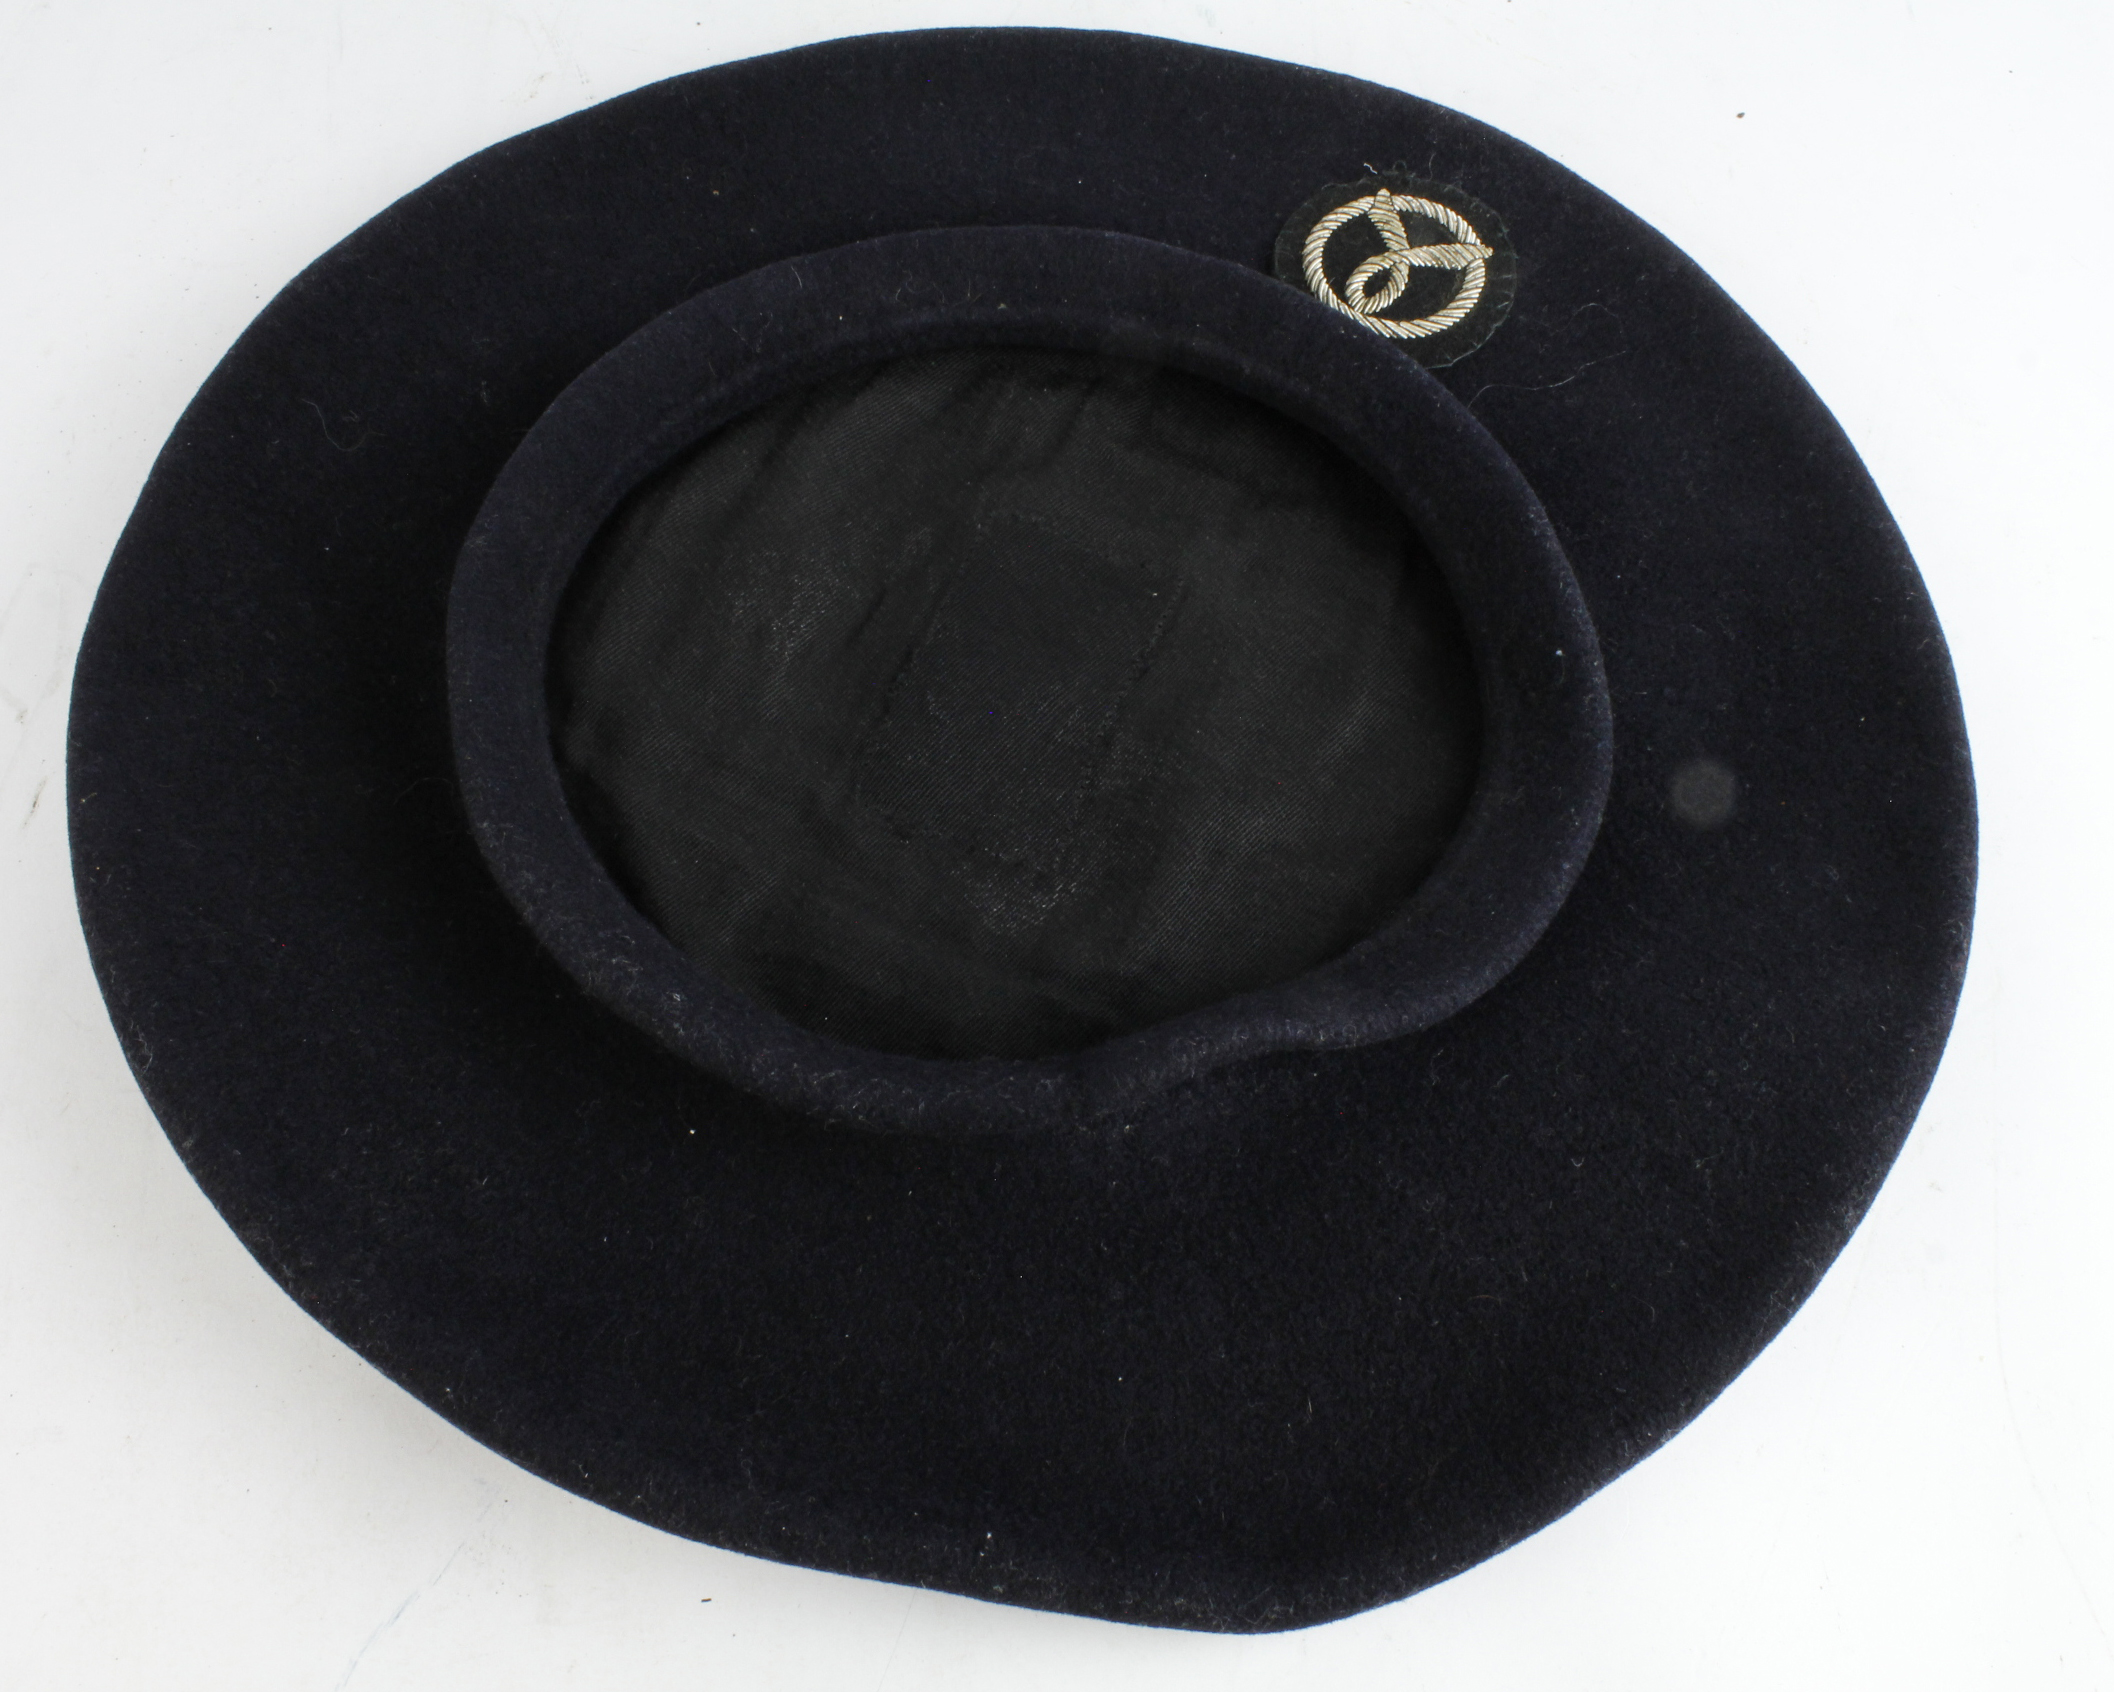 WW2 French Milice Officers Beret. The Milice was a political paramilitary organisation created by